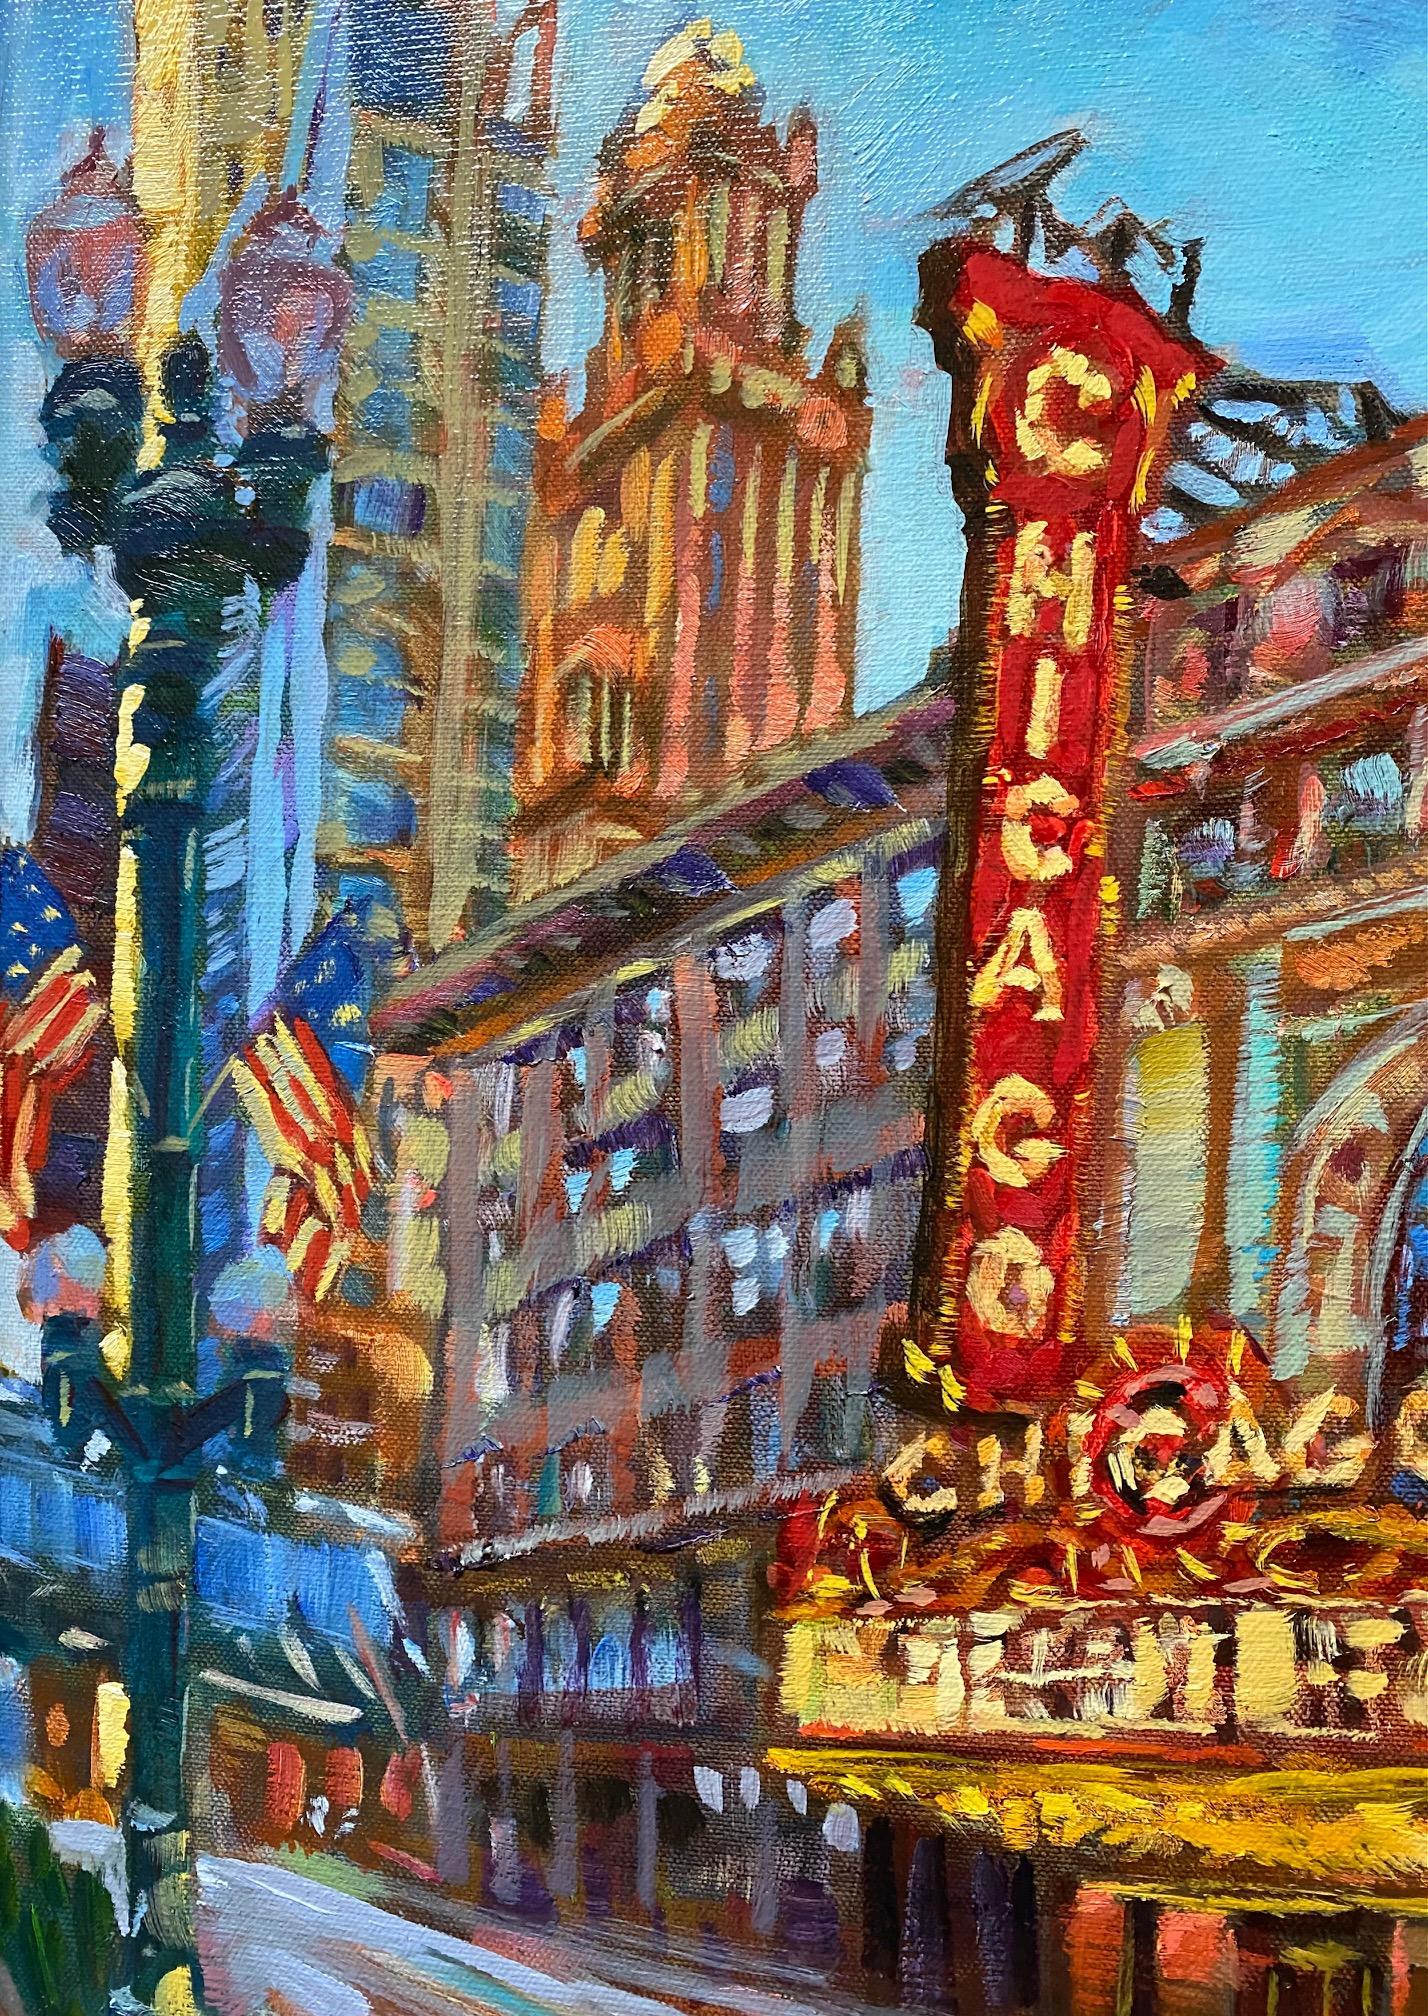 Chicago, original expressionist American urban landscape - Expressionist Painting by Charles Tersolo